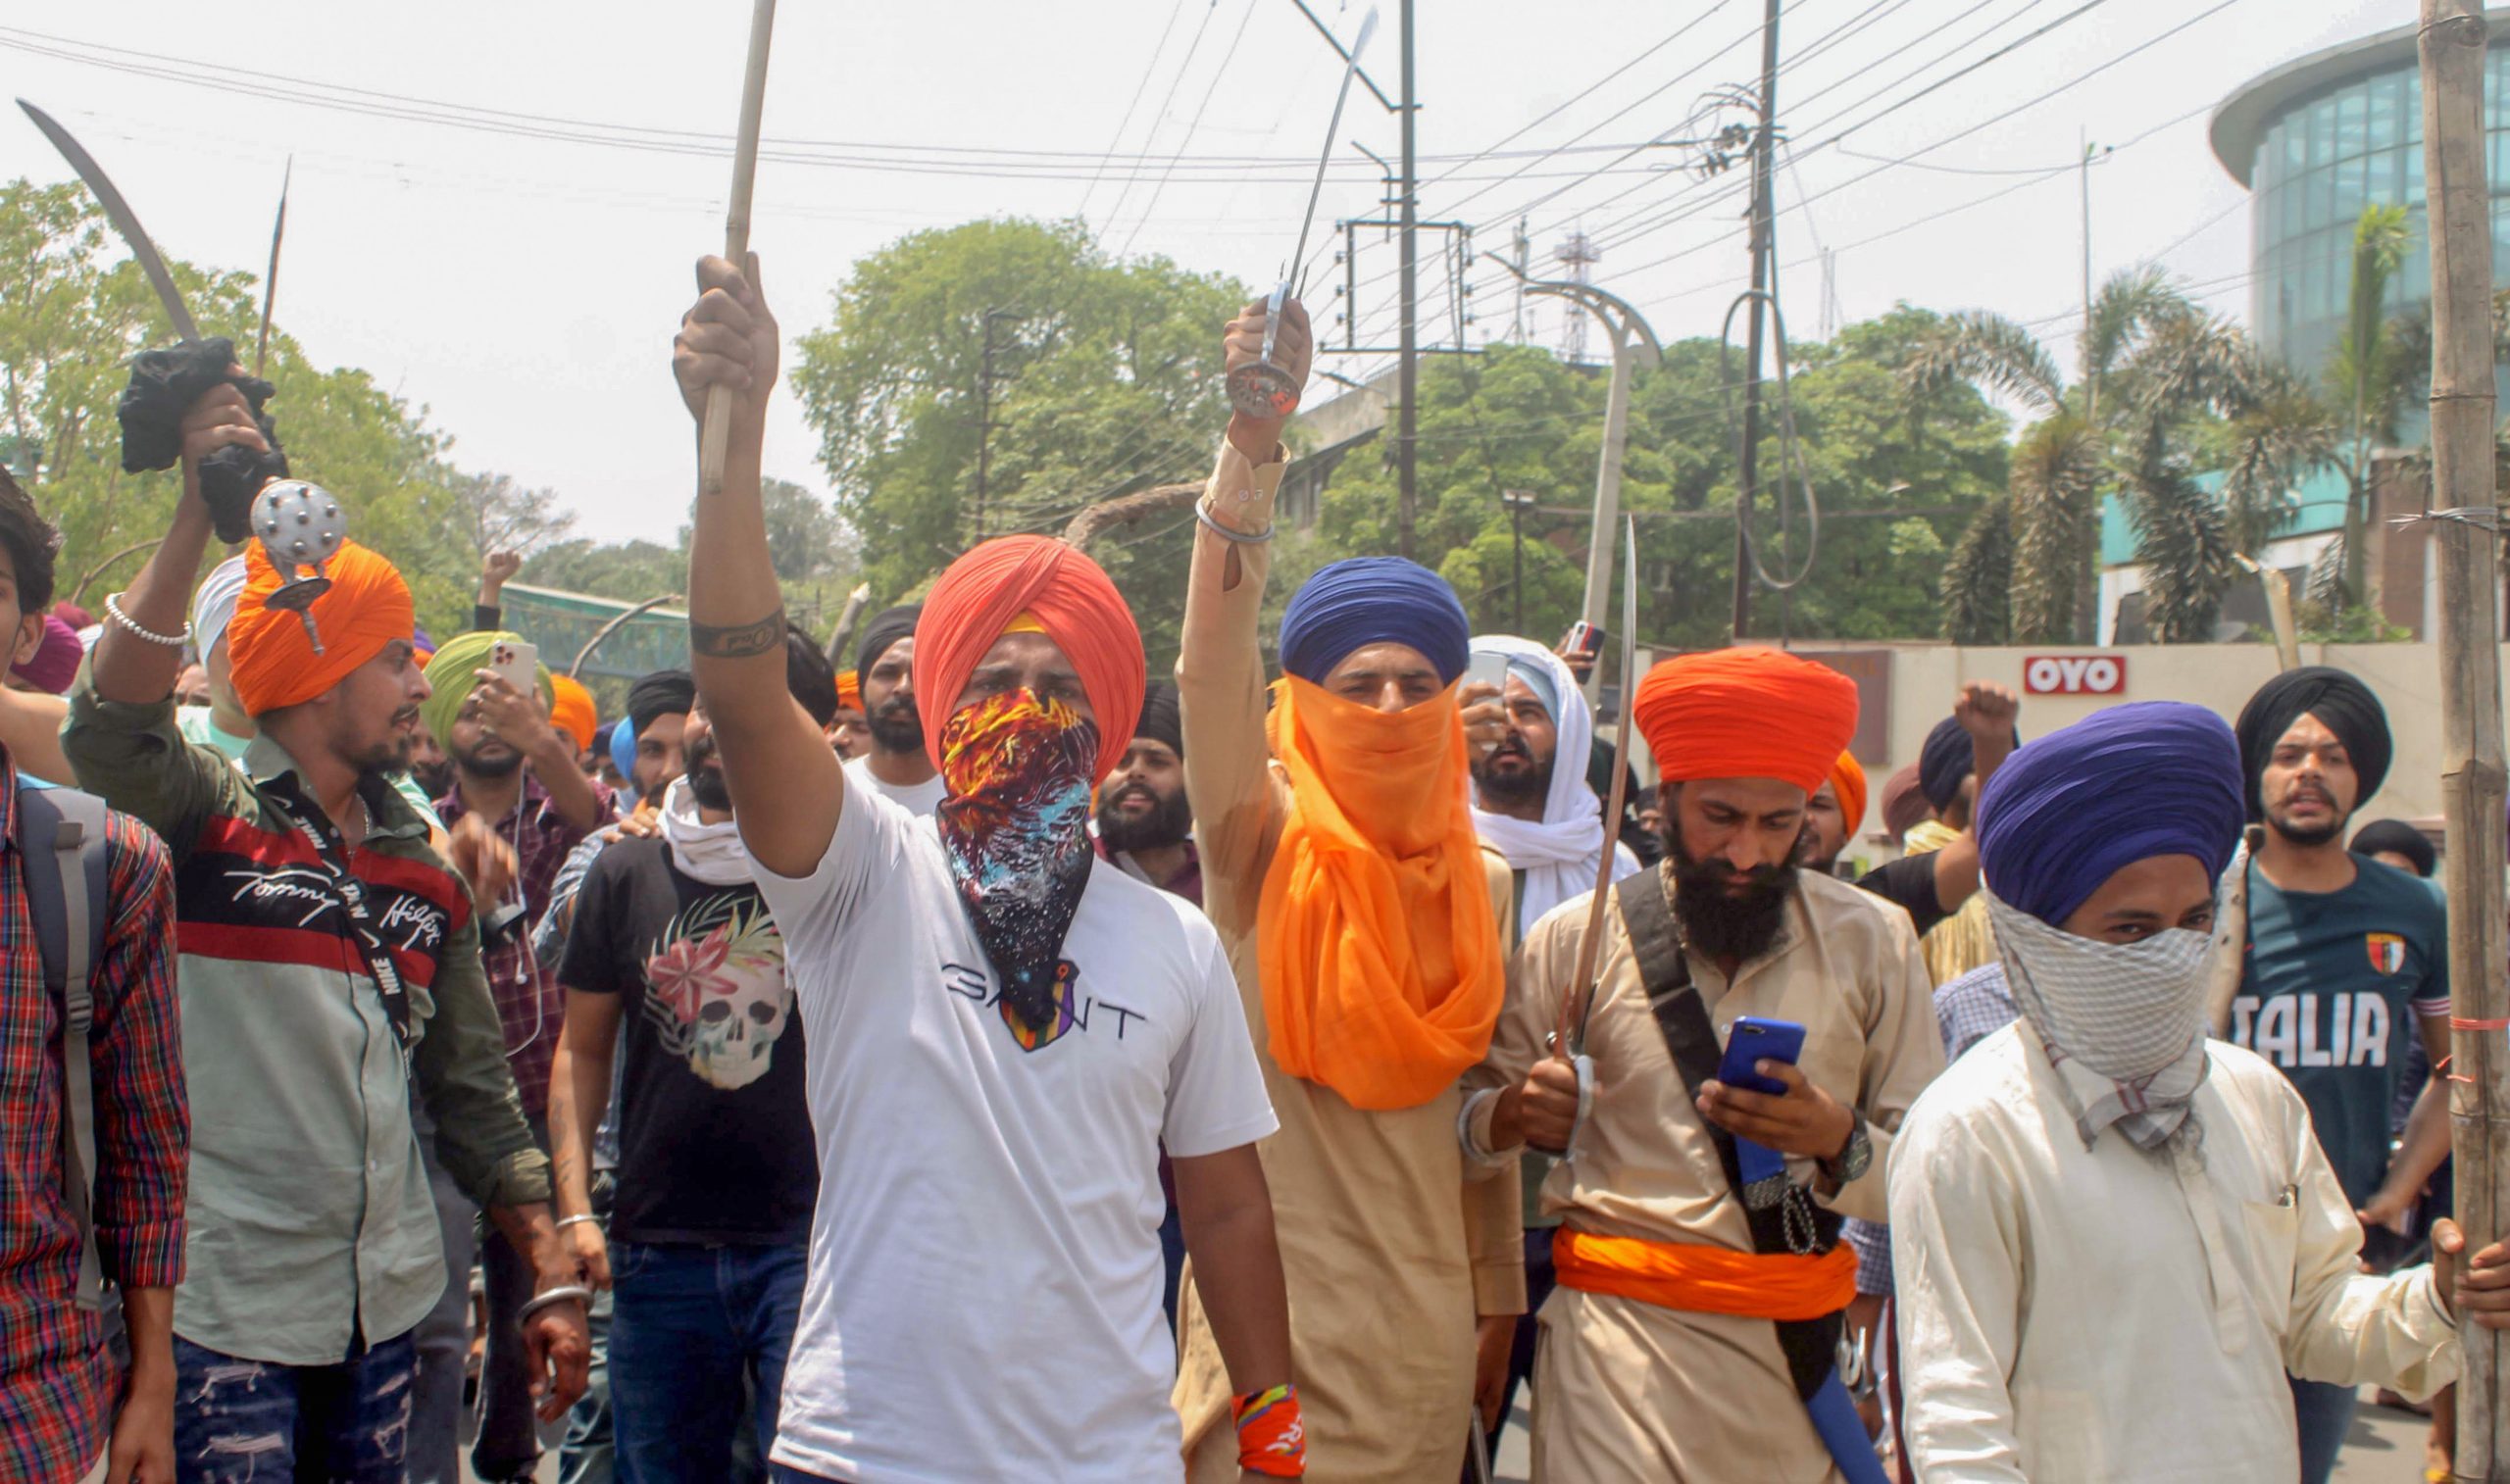 A brief history of the Khalistani movement